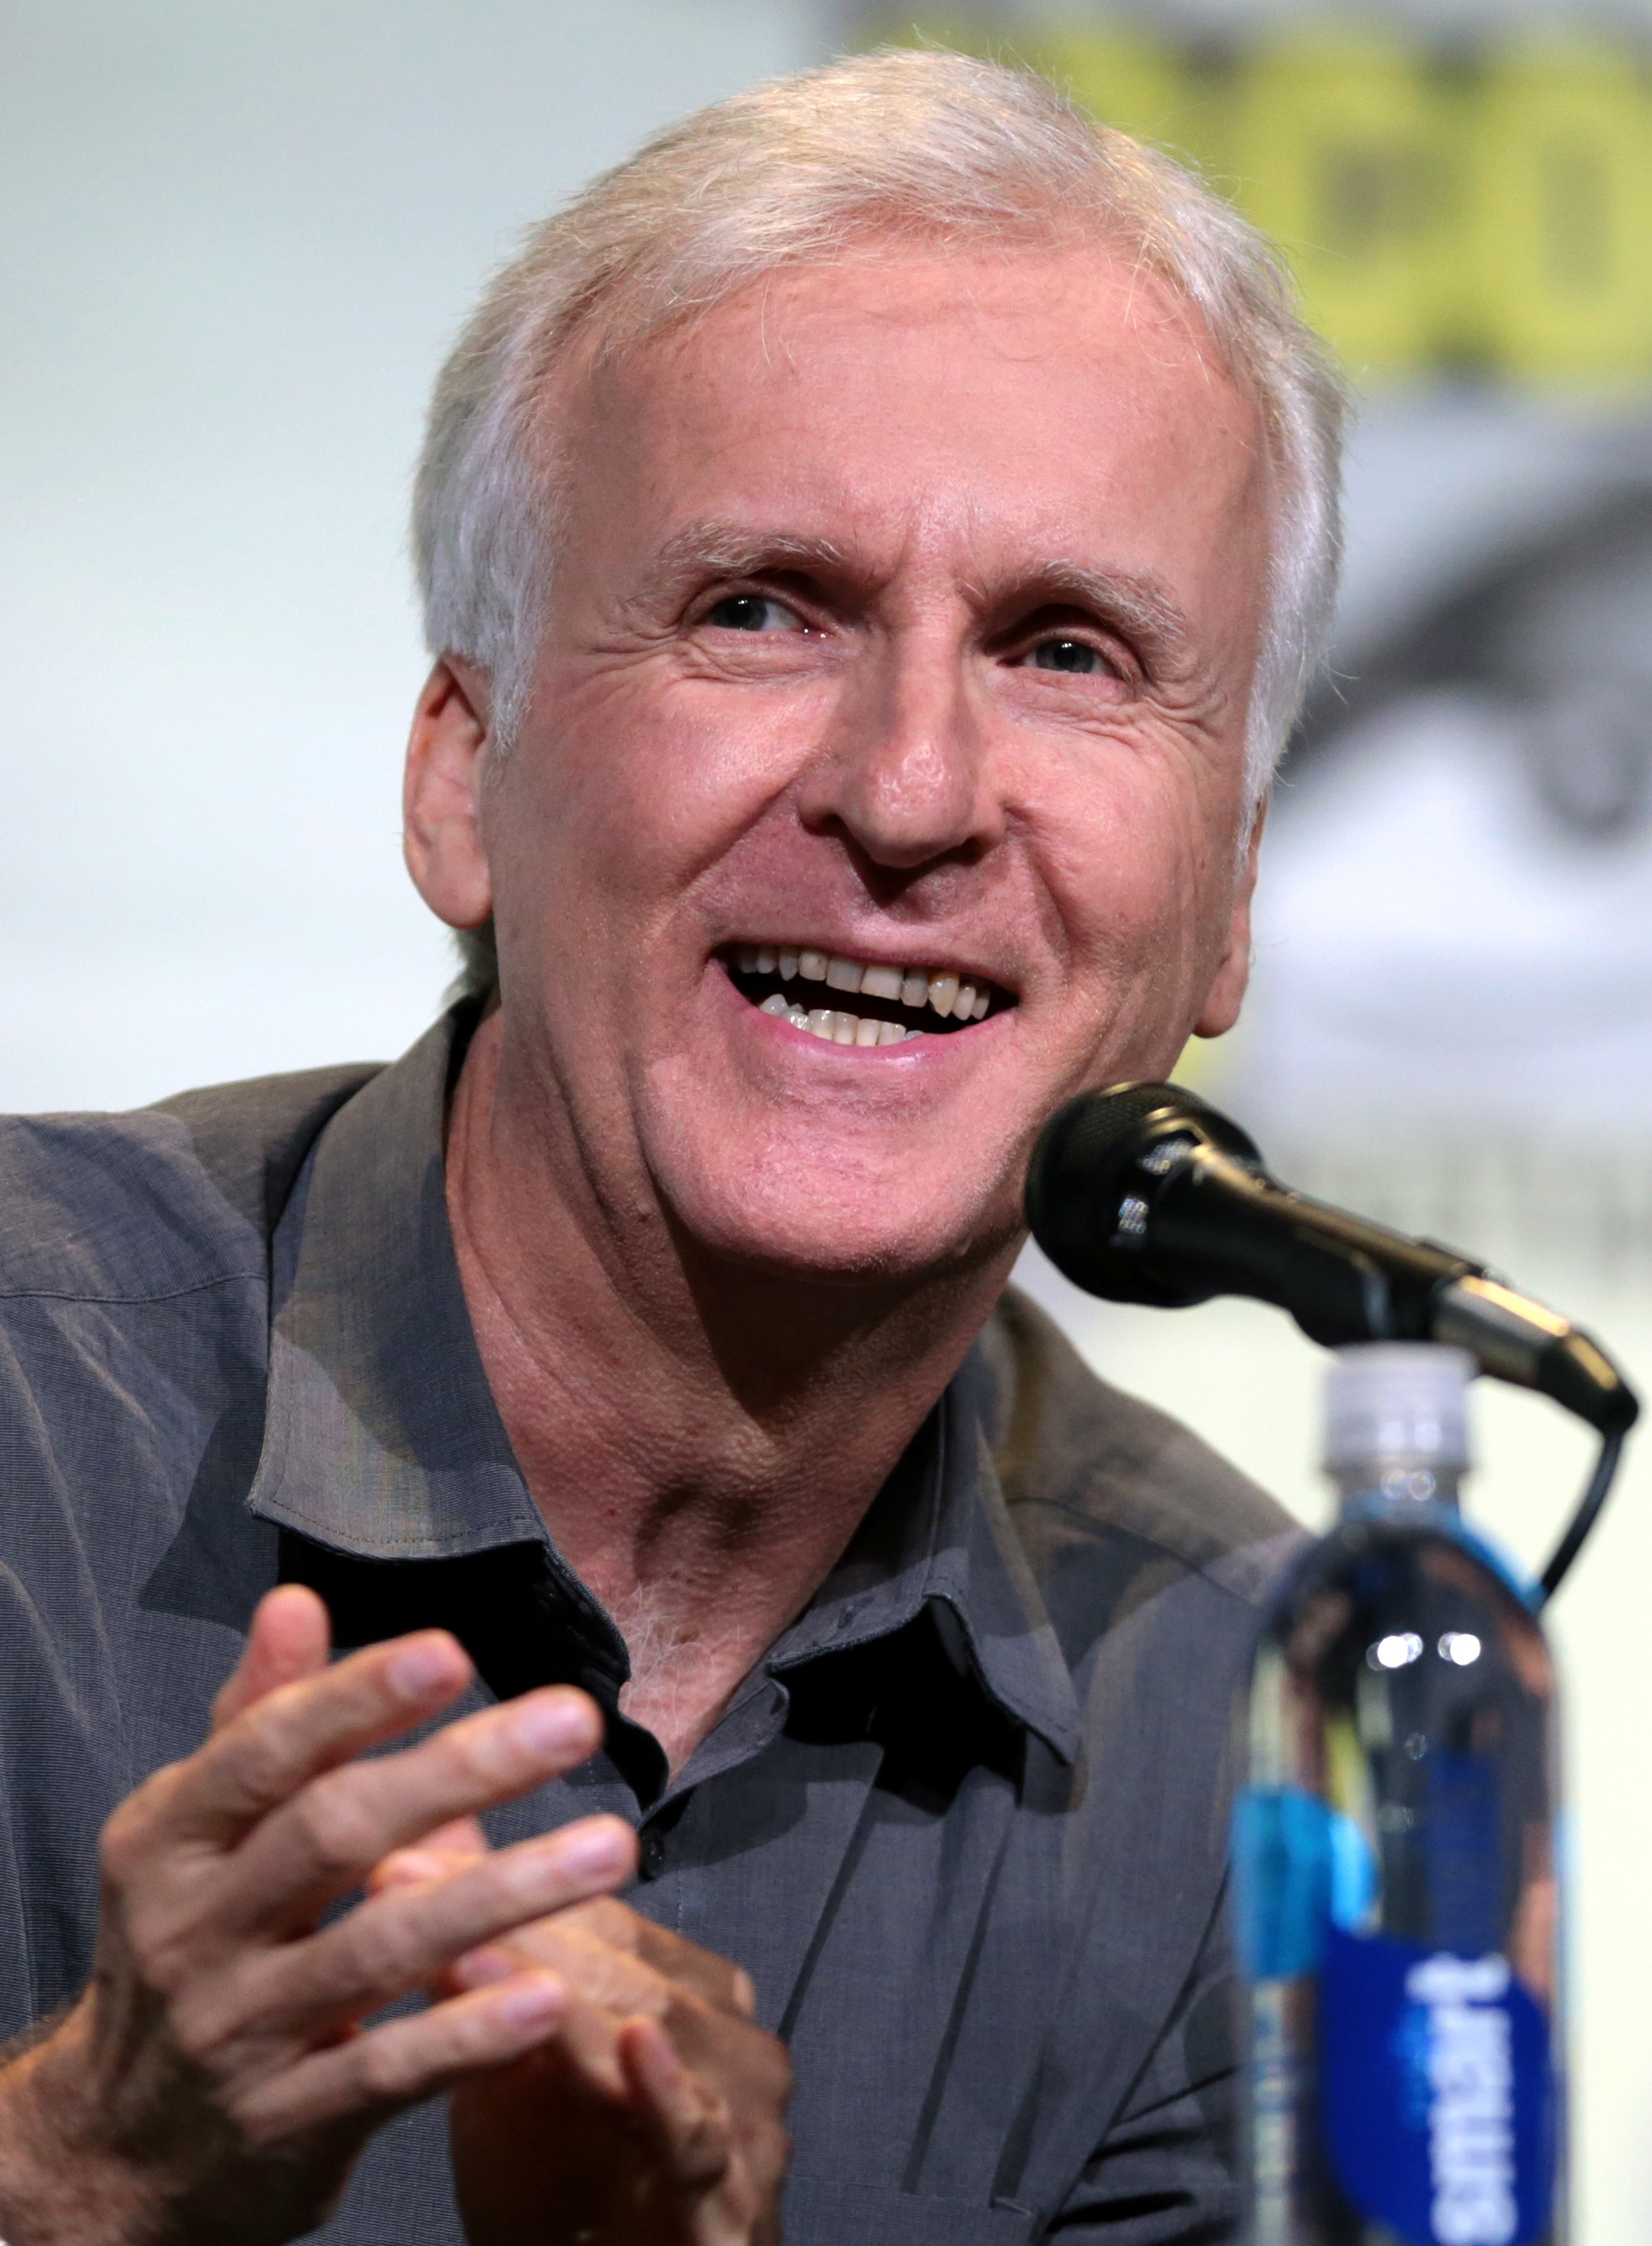 Lowly-Educated Backgrounds, James Cameron